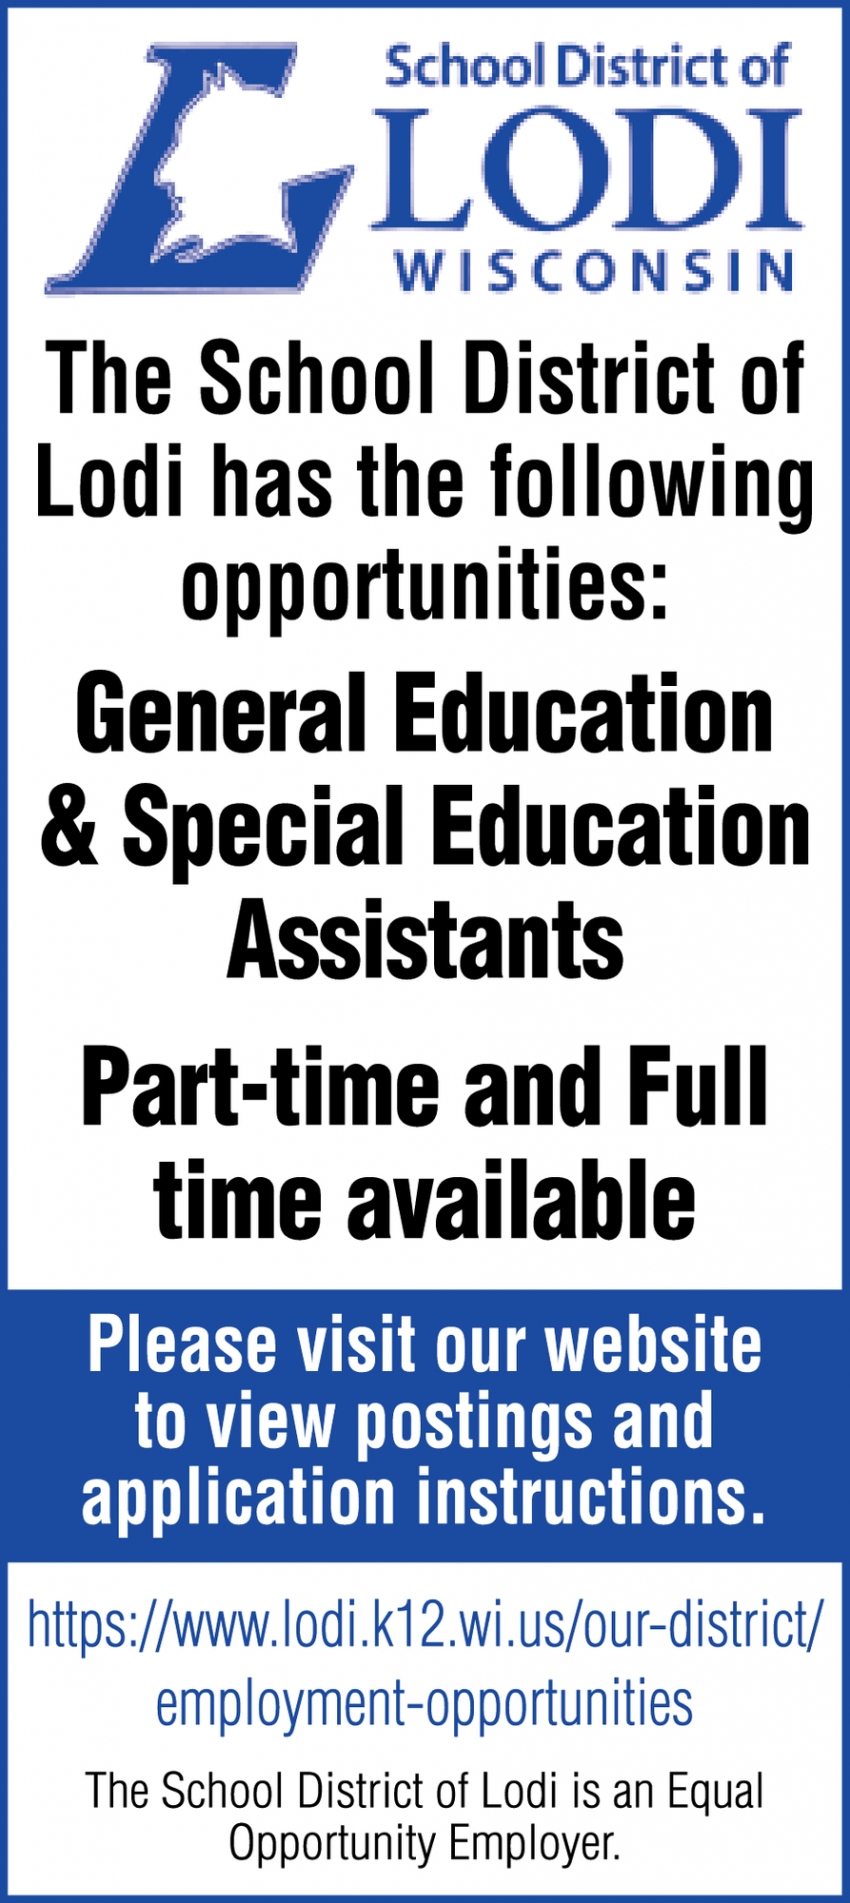 General Education & Special Education Assistants